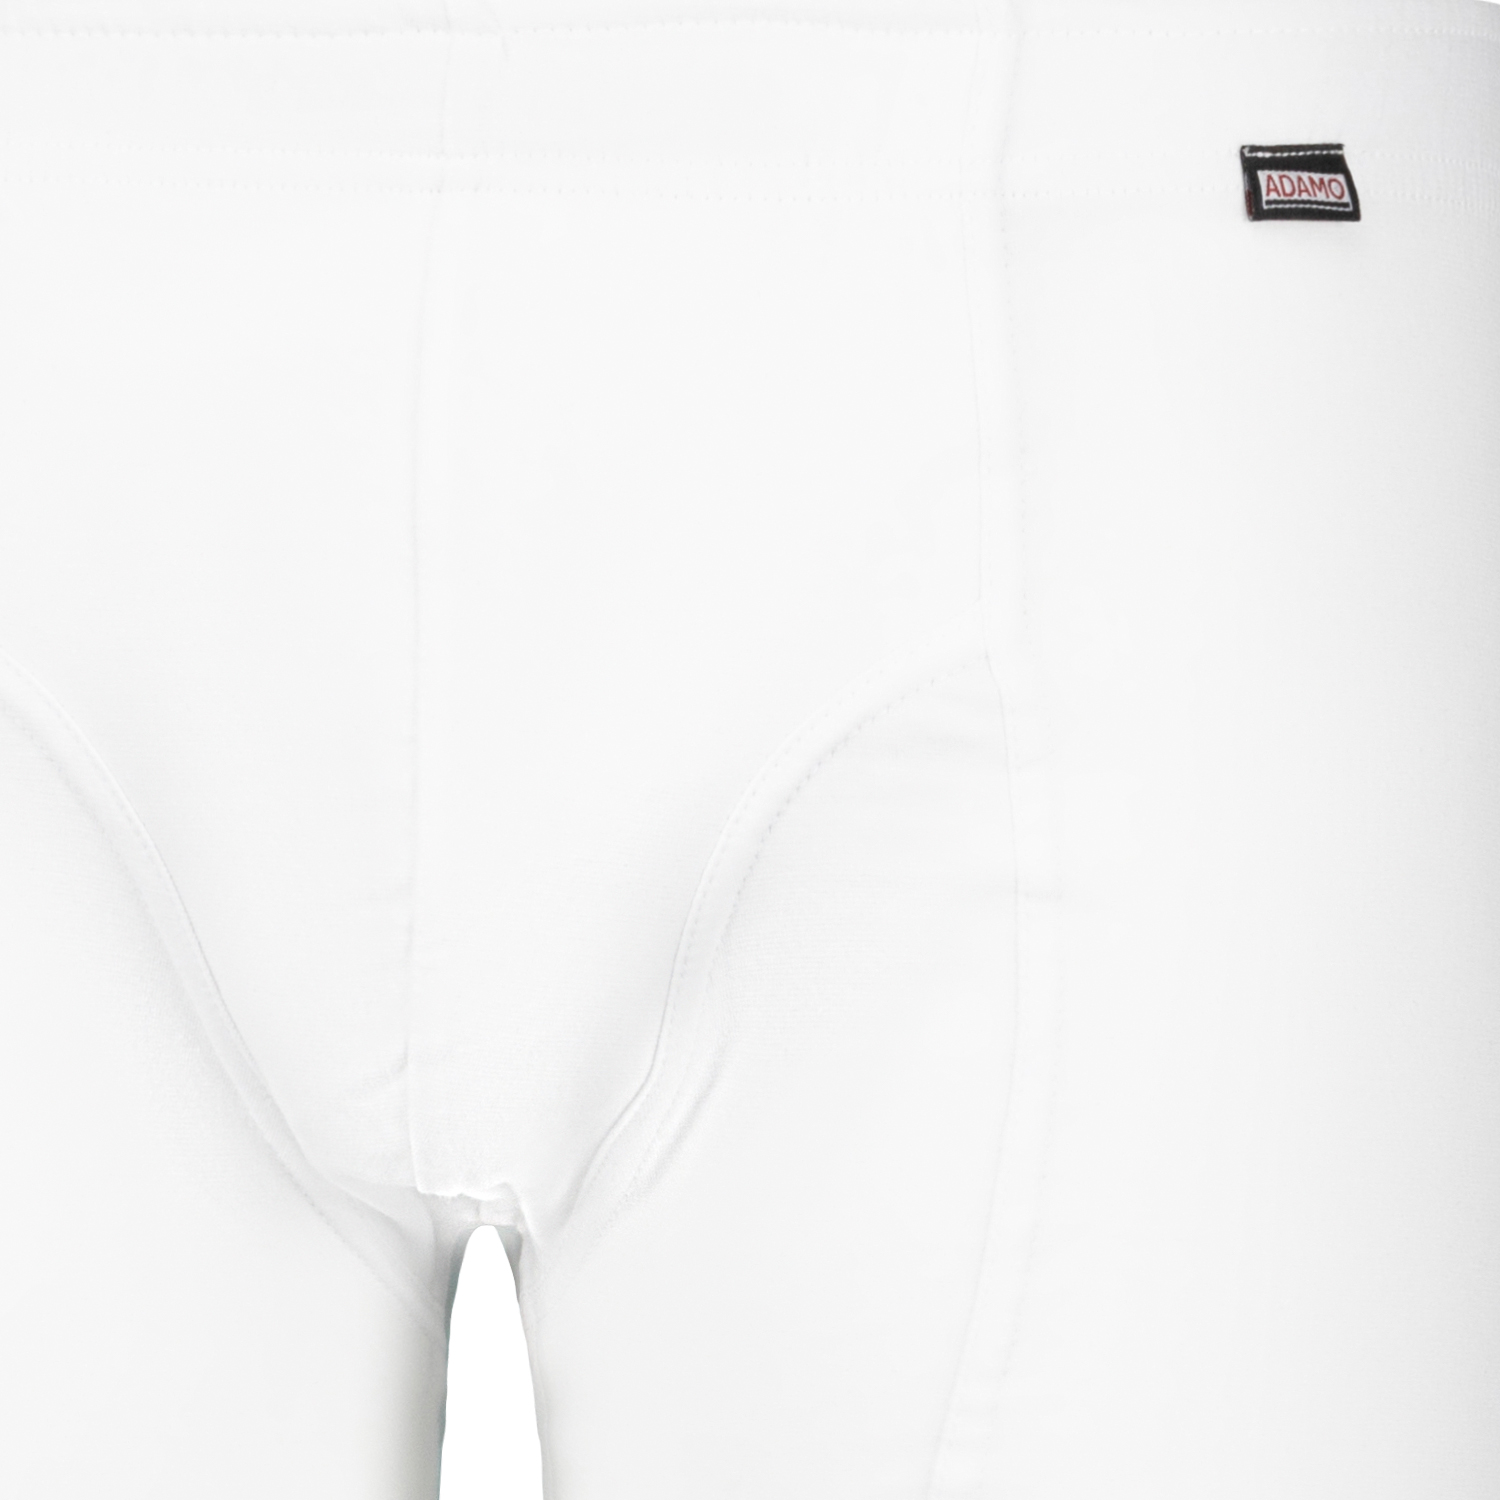 Double pack maxipant "Jack" in white for men by ADAMO up to oversize 20